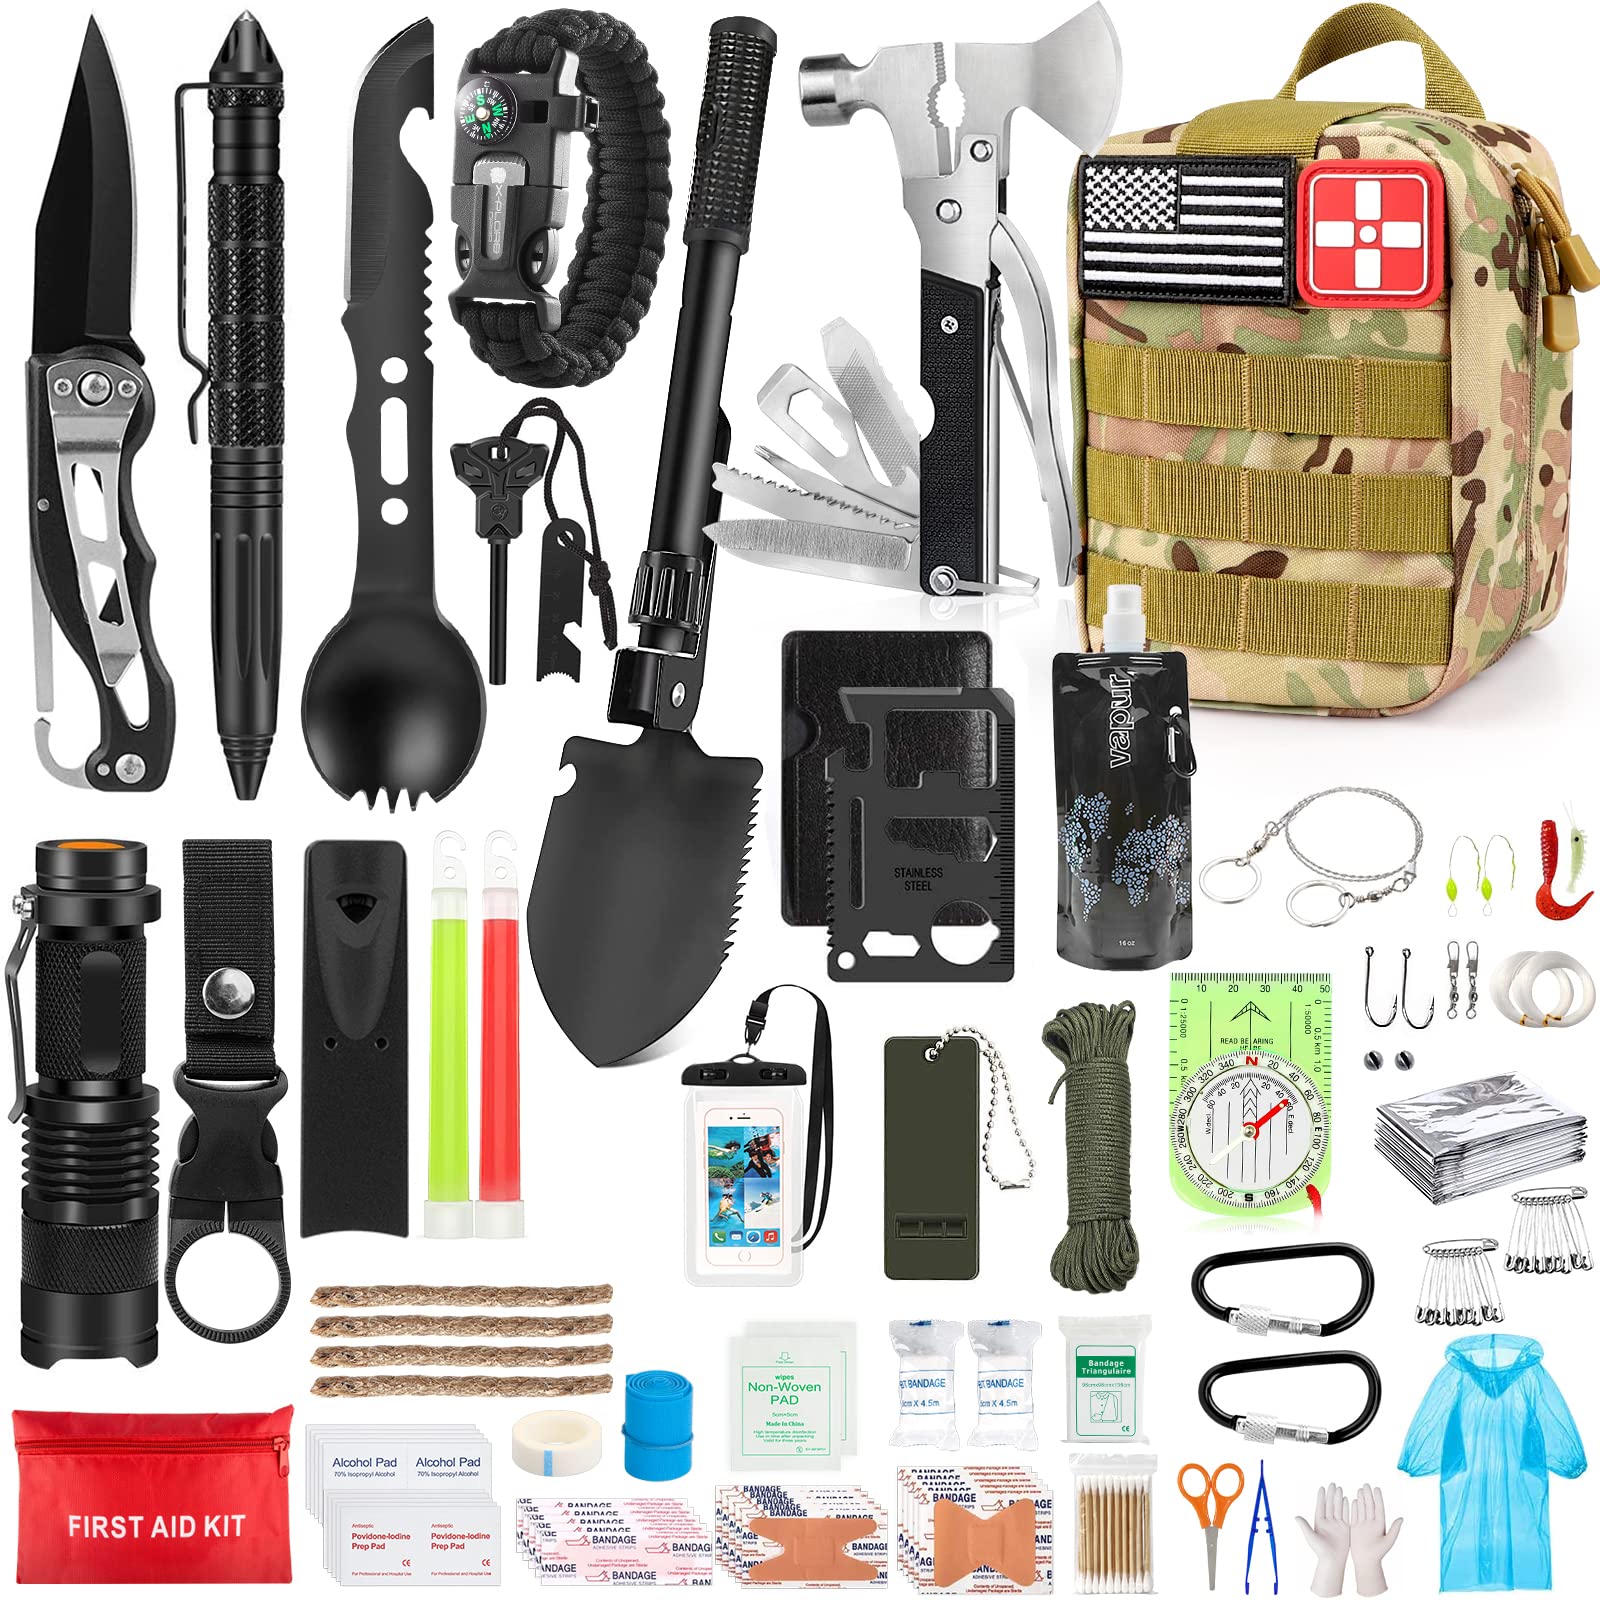 Survival Kit and First Aid Kit with 142 Pieces, Molle System Bag, Equipment  for Camping, Backpacking, Hiking Kit, Adventures and More